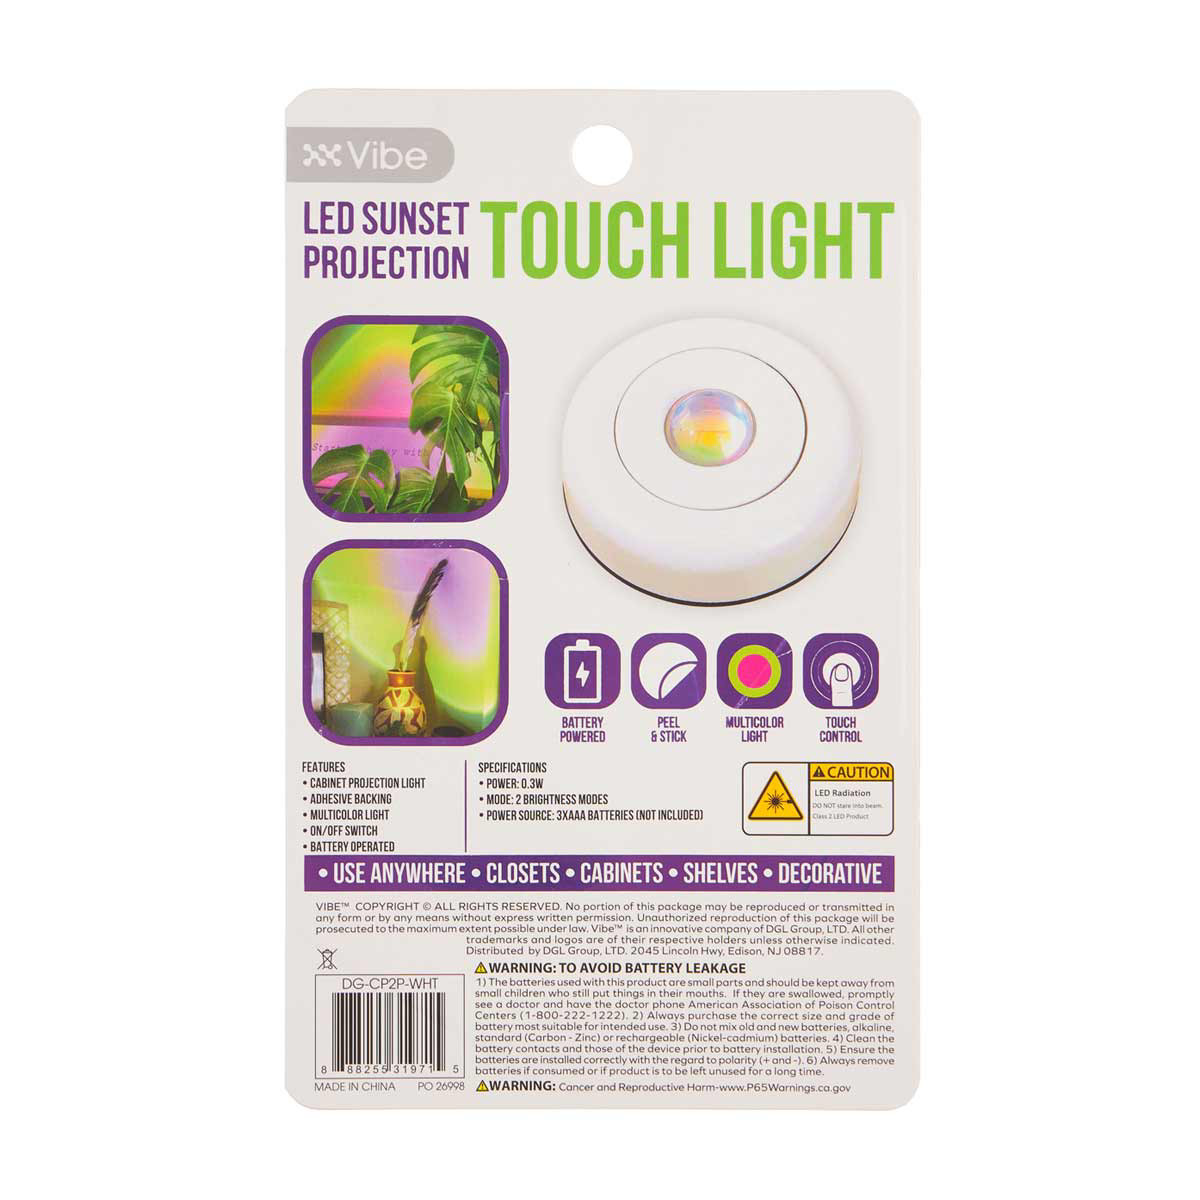 Vibe LED Sunset Projection Touch Light, Pack of 2